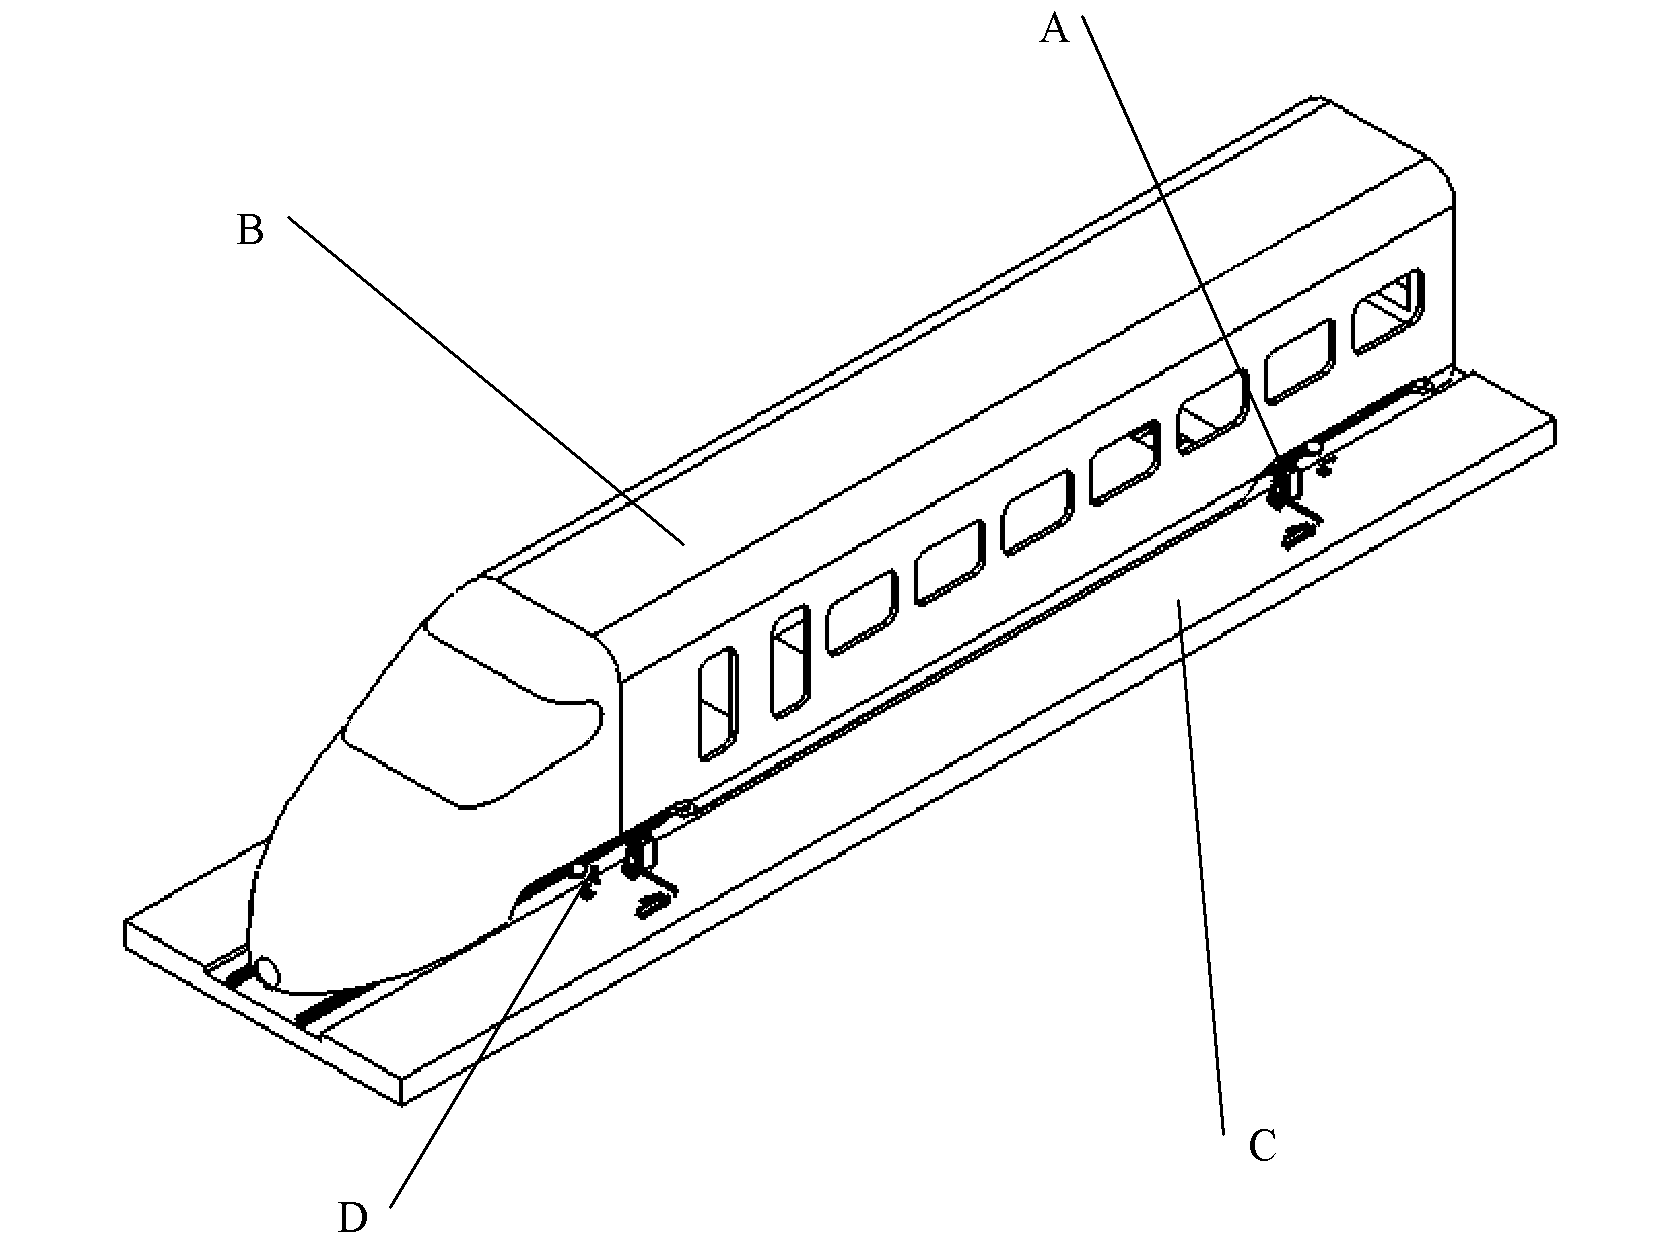 System for testing vibration attenuation of suspension of rail vehicle